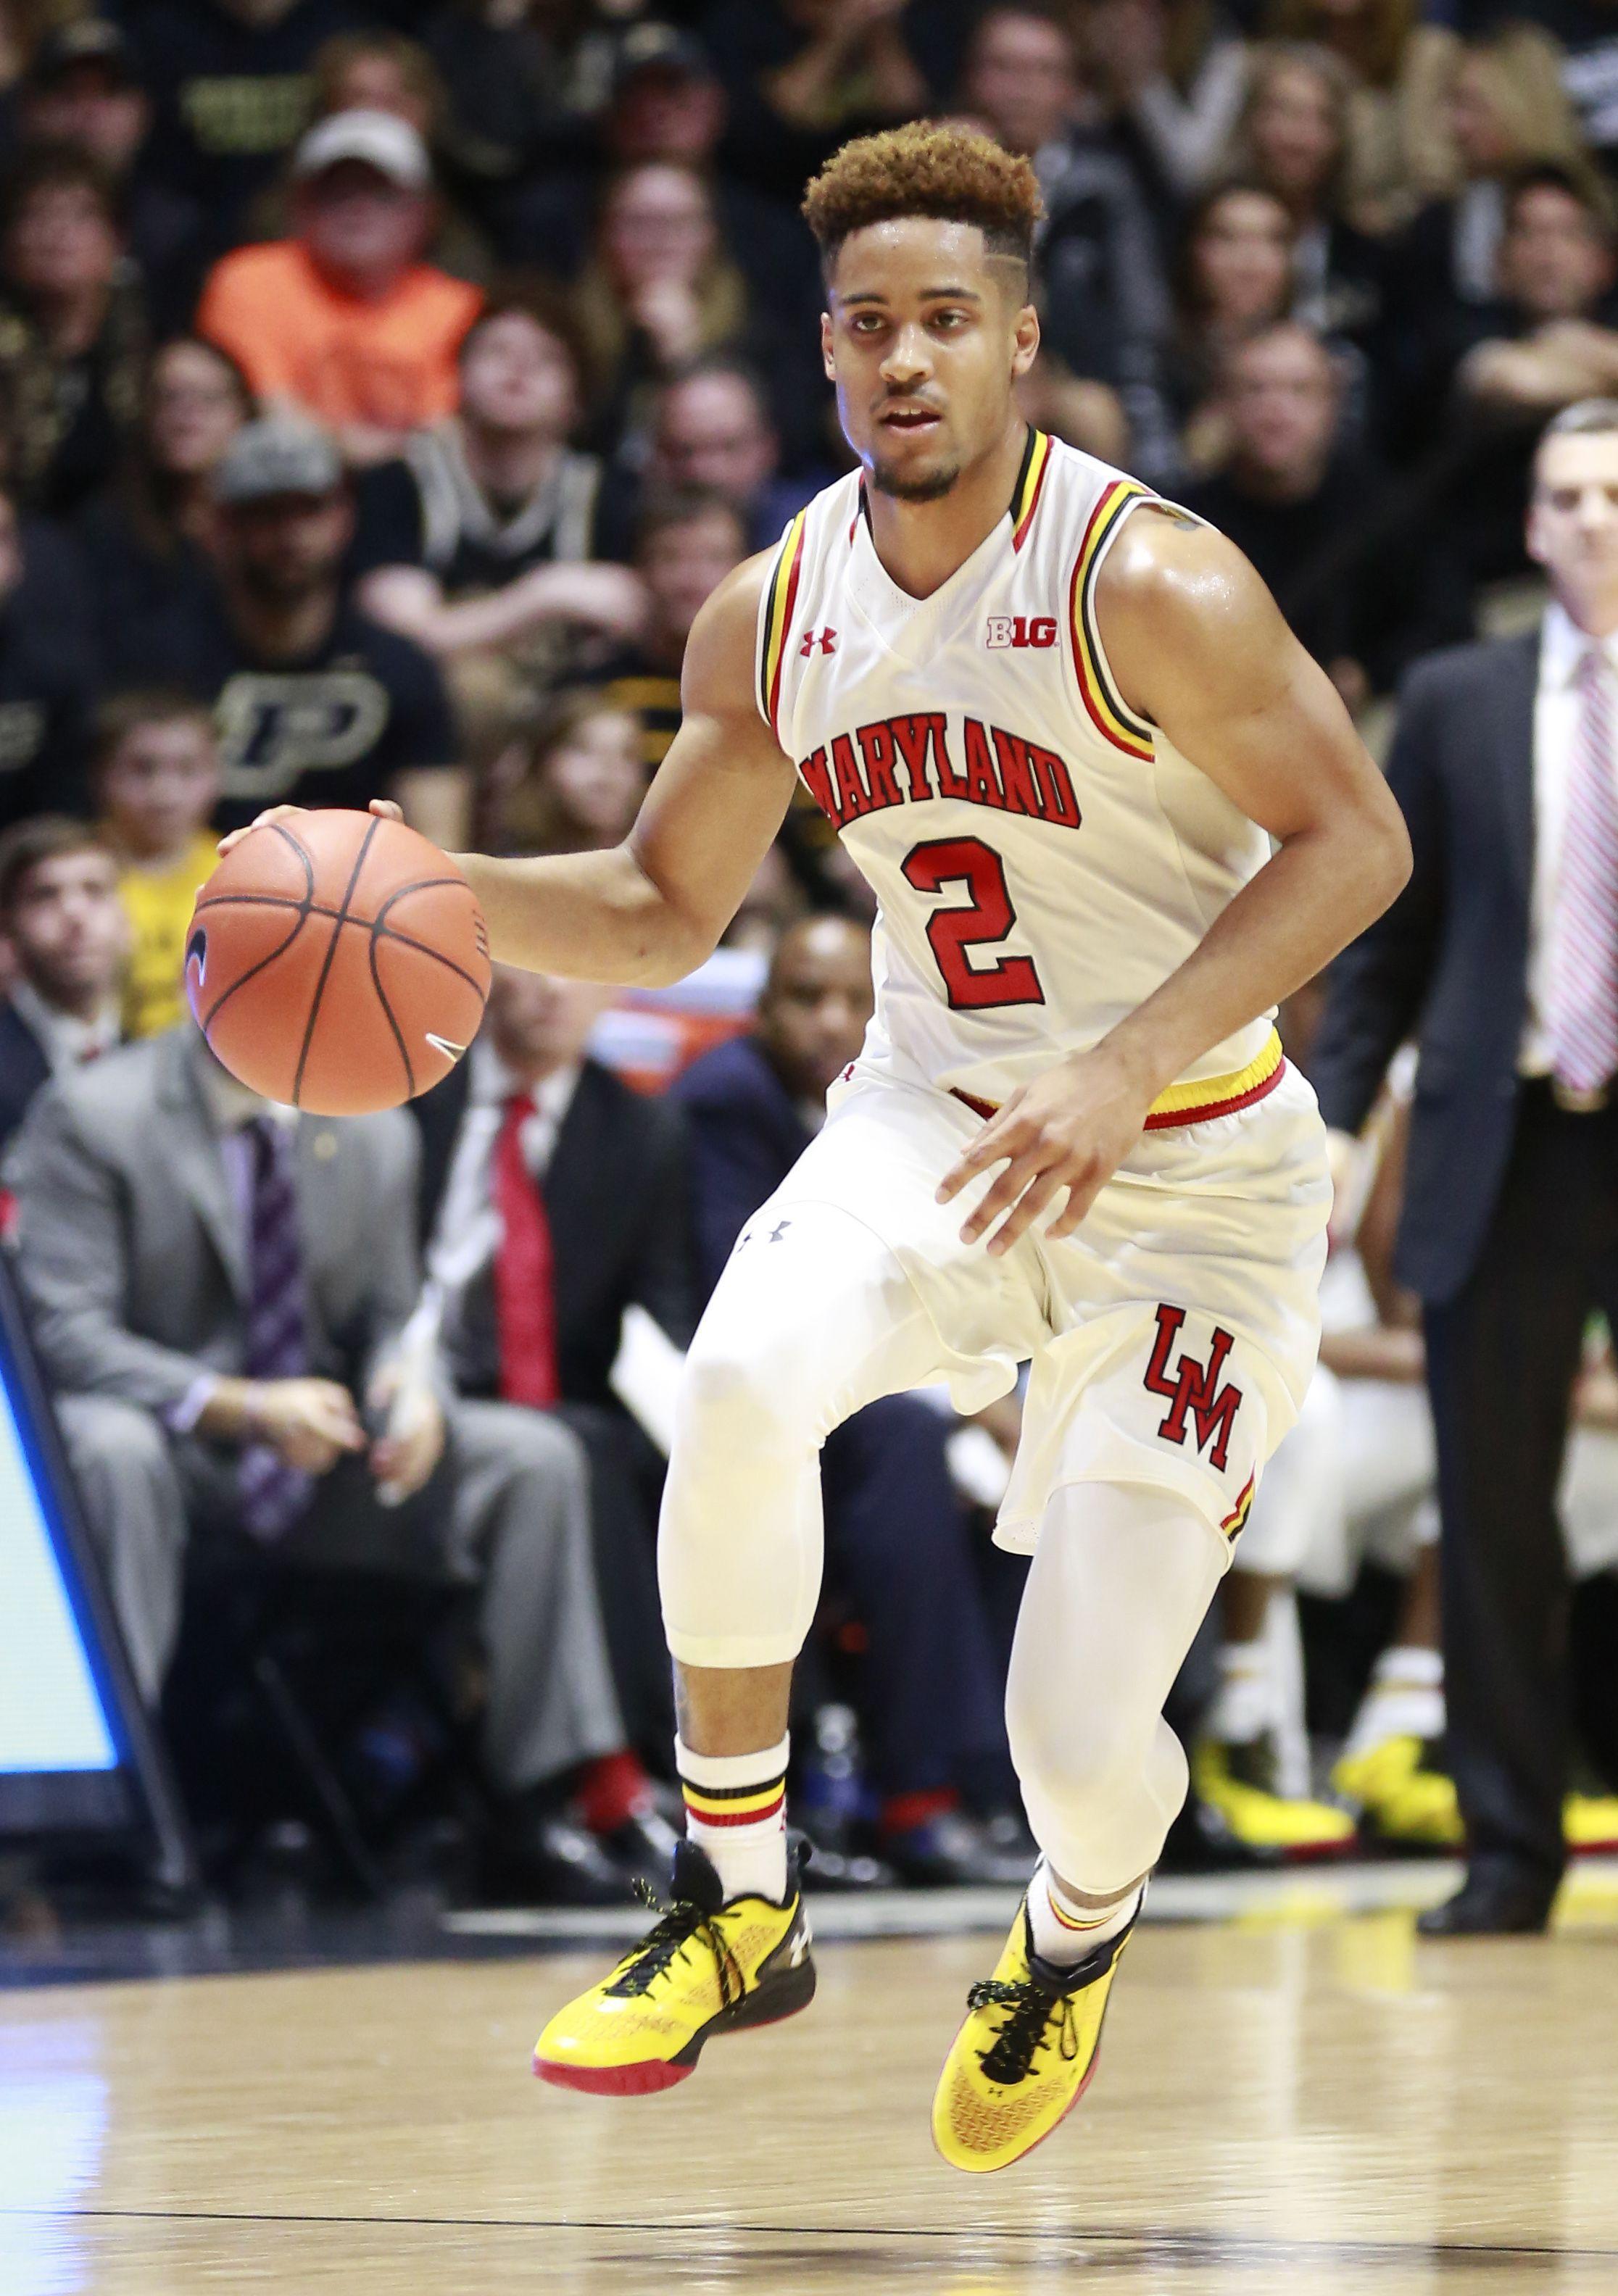 LOVERRO: Melo Trimble opted for another year at Maryland rather